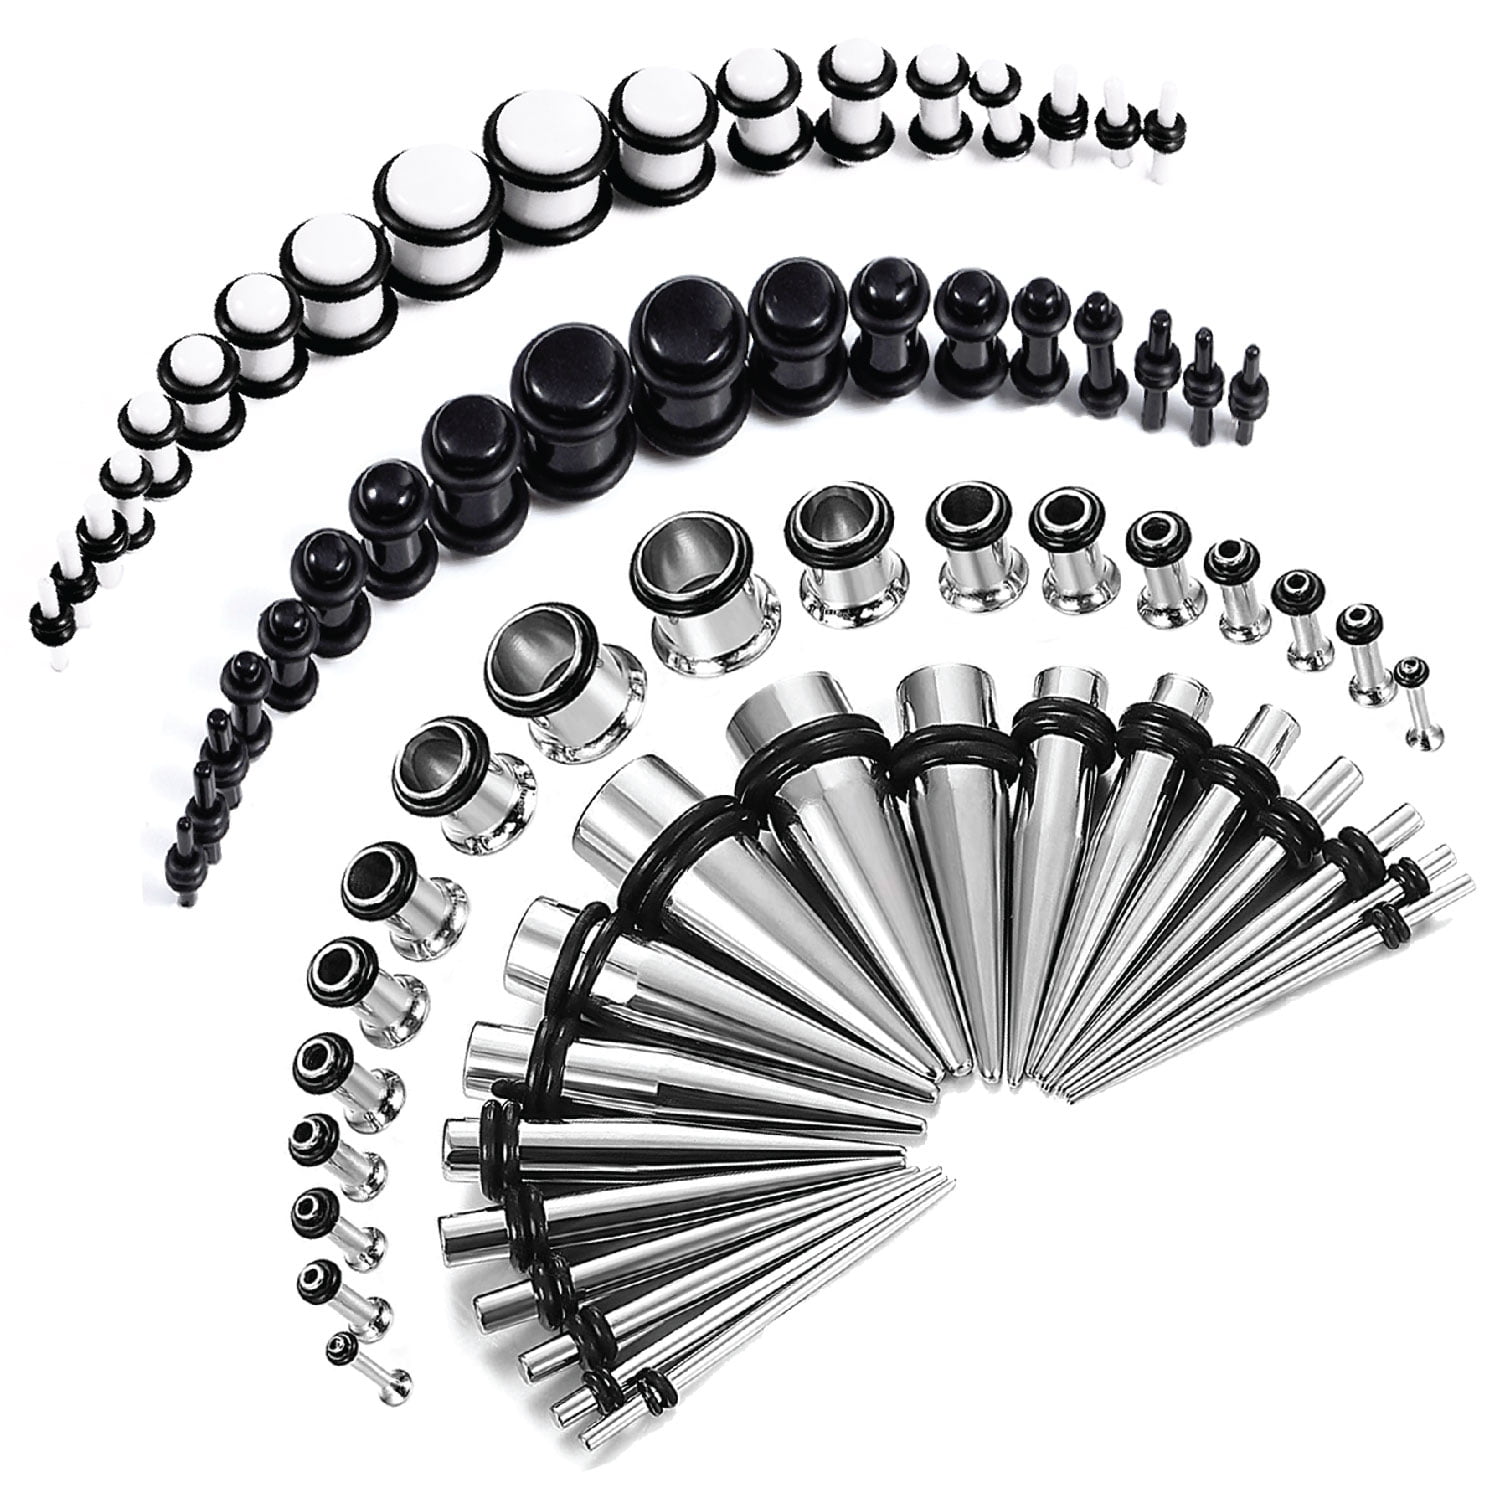 Ear Gauges Expander Set Body Piercing Jewelry Briana Williams 36-50pcs Ear Stretchers Kit 14G-00G Stainless Steel & Acrylic Ear Tapers and Plugs Tunnels